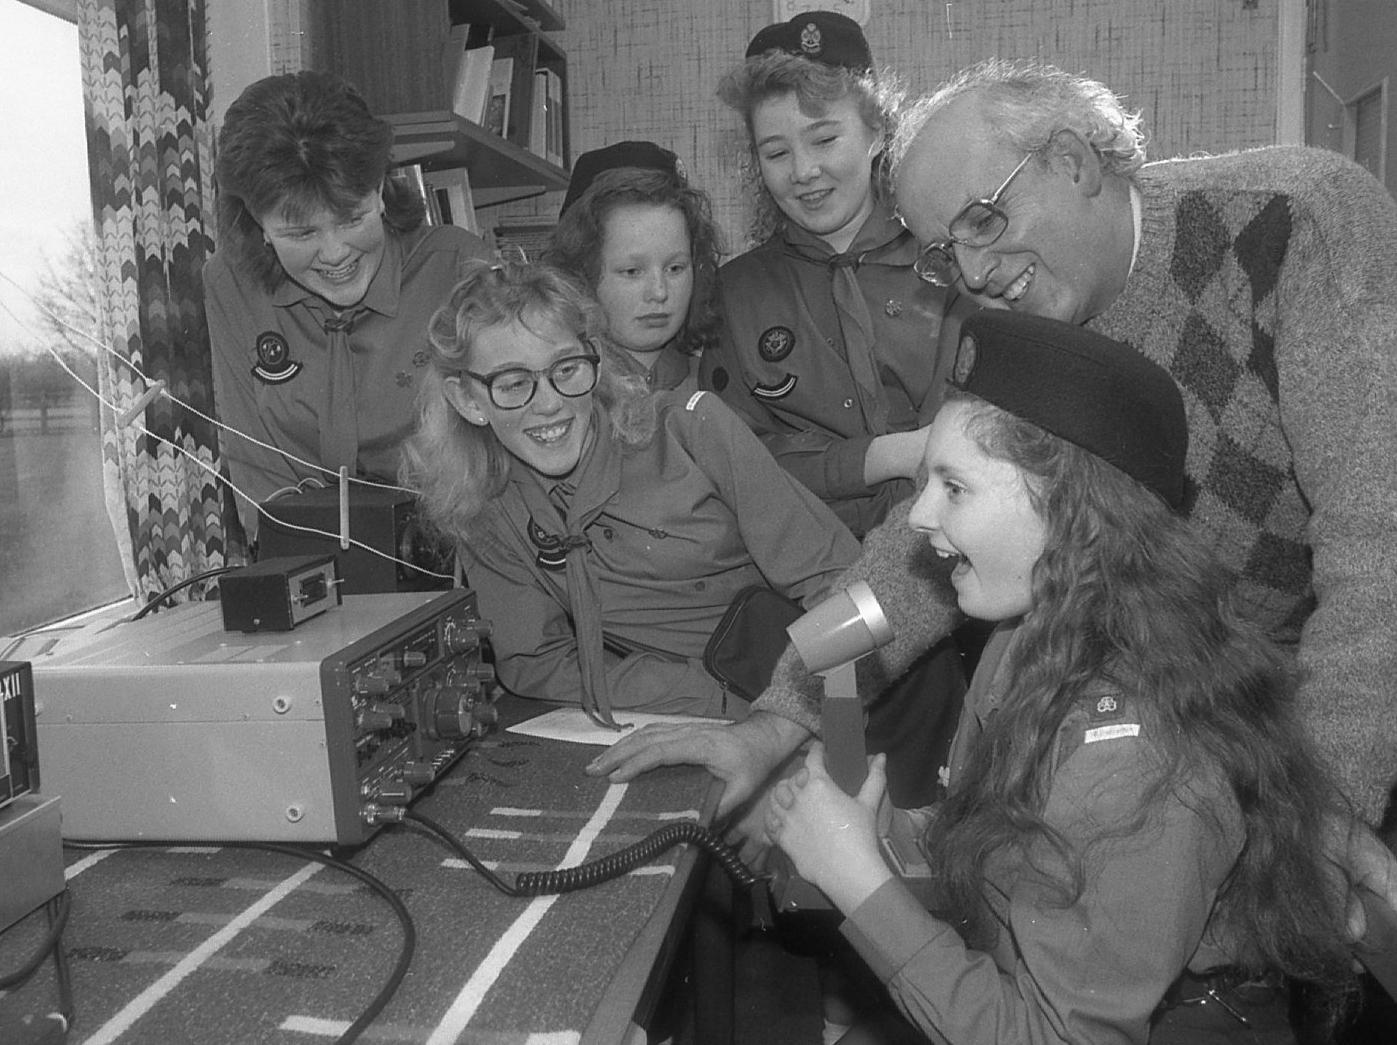 The airwaves were buzzing when guides from the First Bretherton Girl Guides enrolled the help of radio ham Frank Harrison of Leyland on "Thinking Day". Calling all Guides - Victoria Shone on the short wave radio with Nicola Corry, Sarah Clarke, Karen Flaxman, Cerise Washington and Frank Harrison